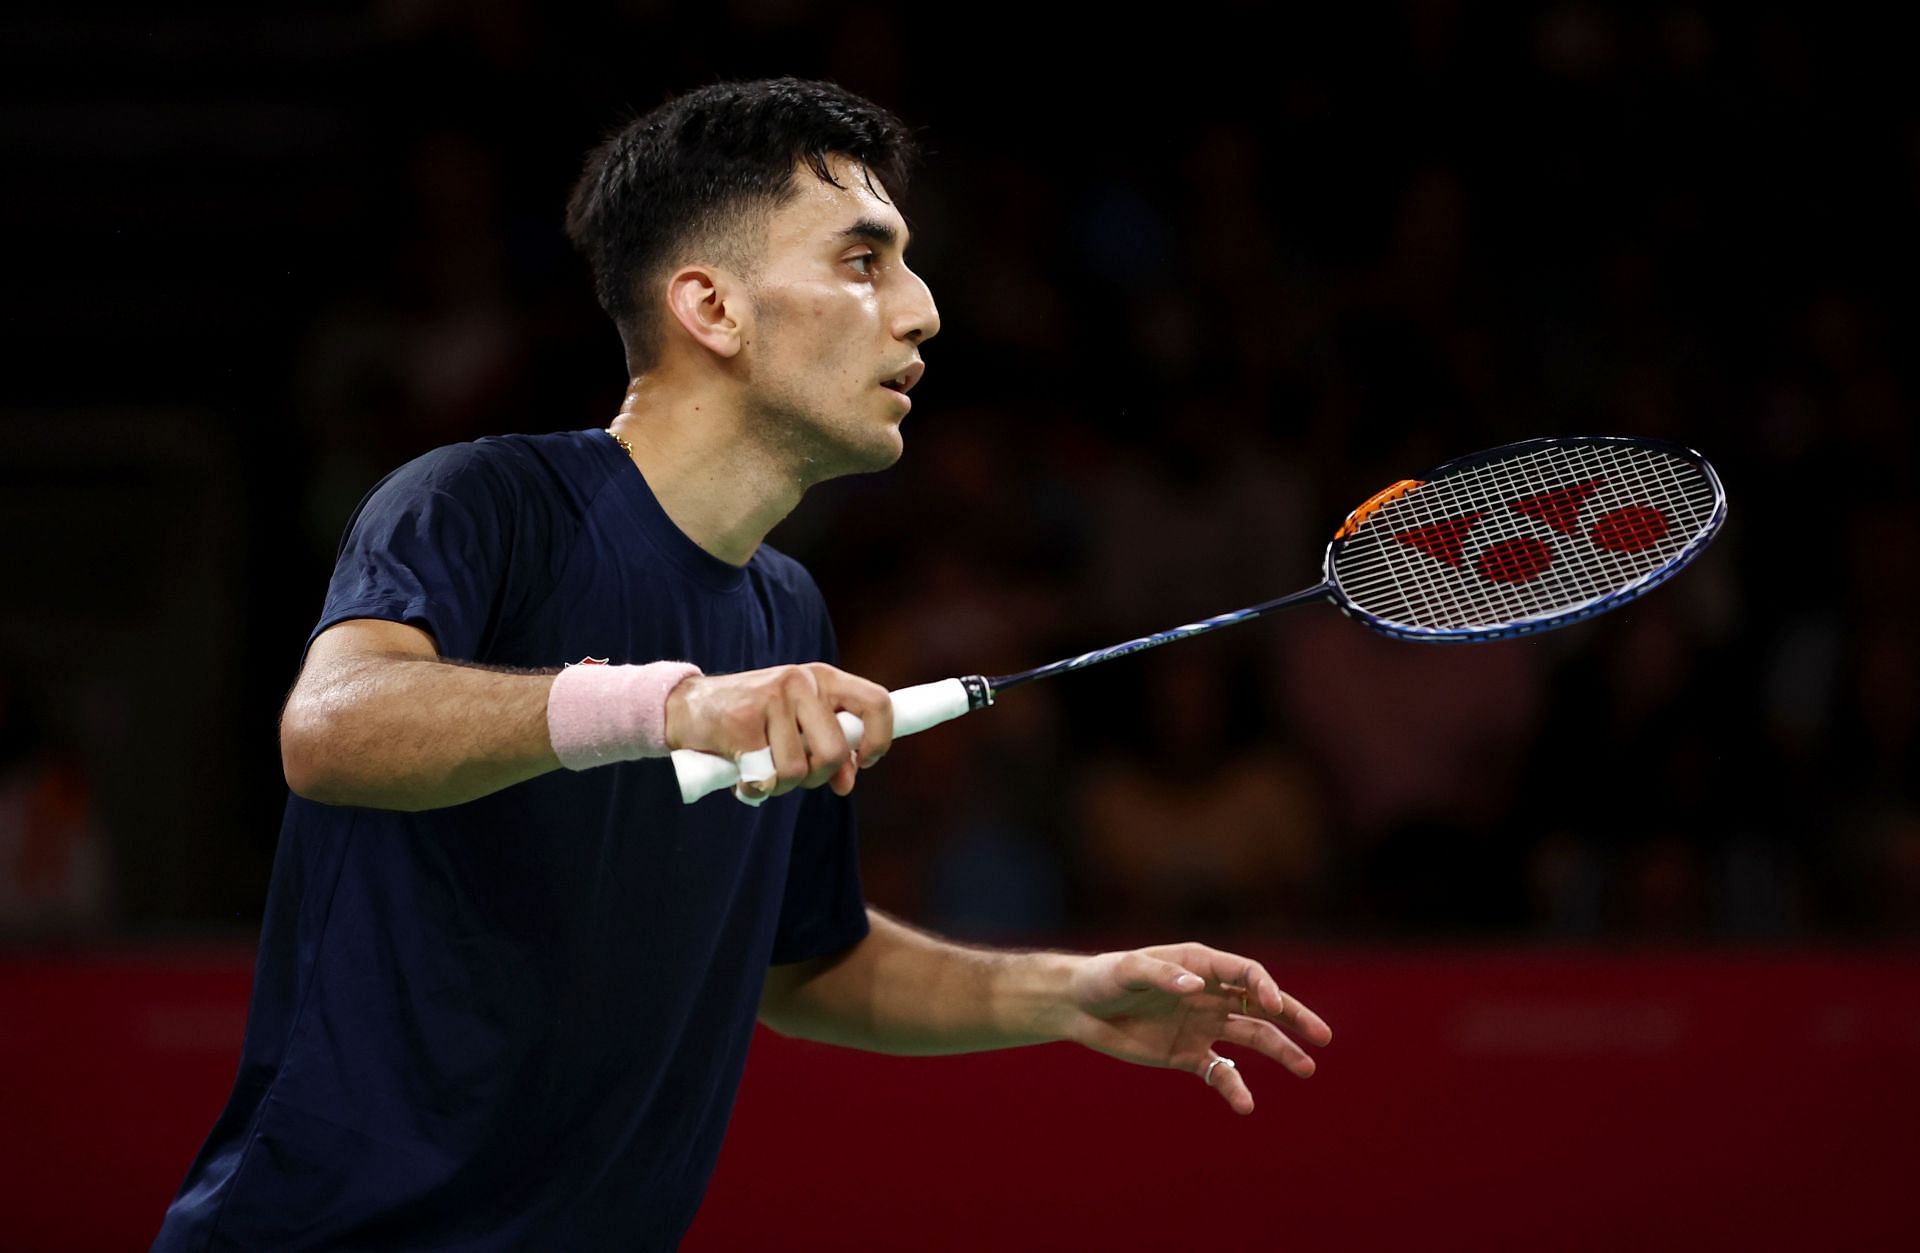 Thailand Open 2023 Lakshya Sen vs Leong Jun Hao preview, head-to-head, prediction, where to watch and live streaming details